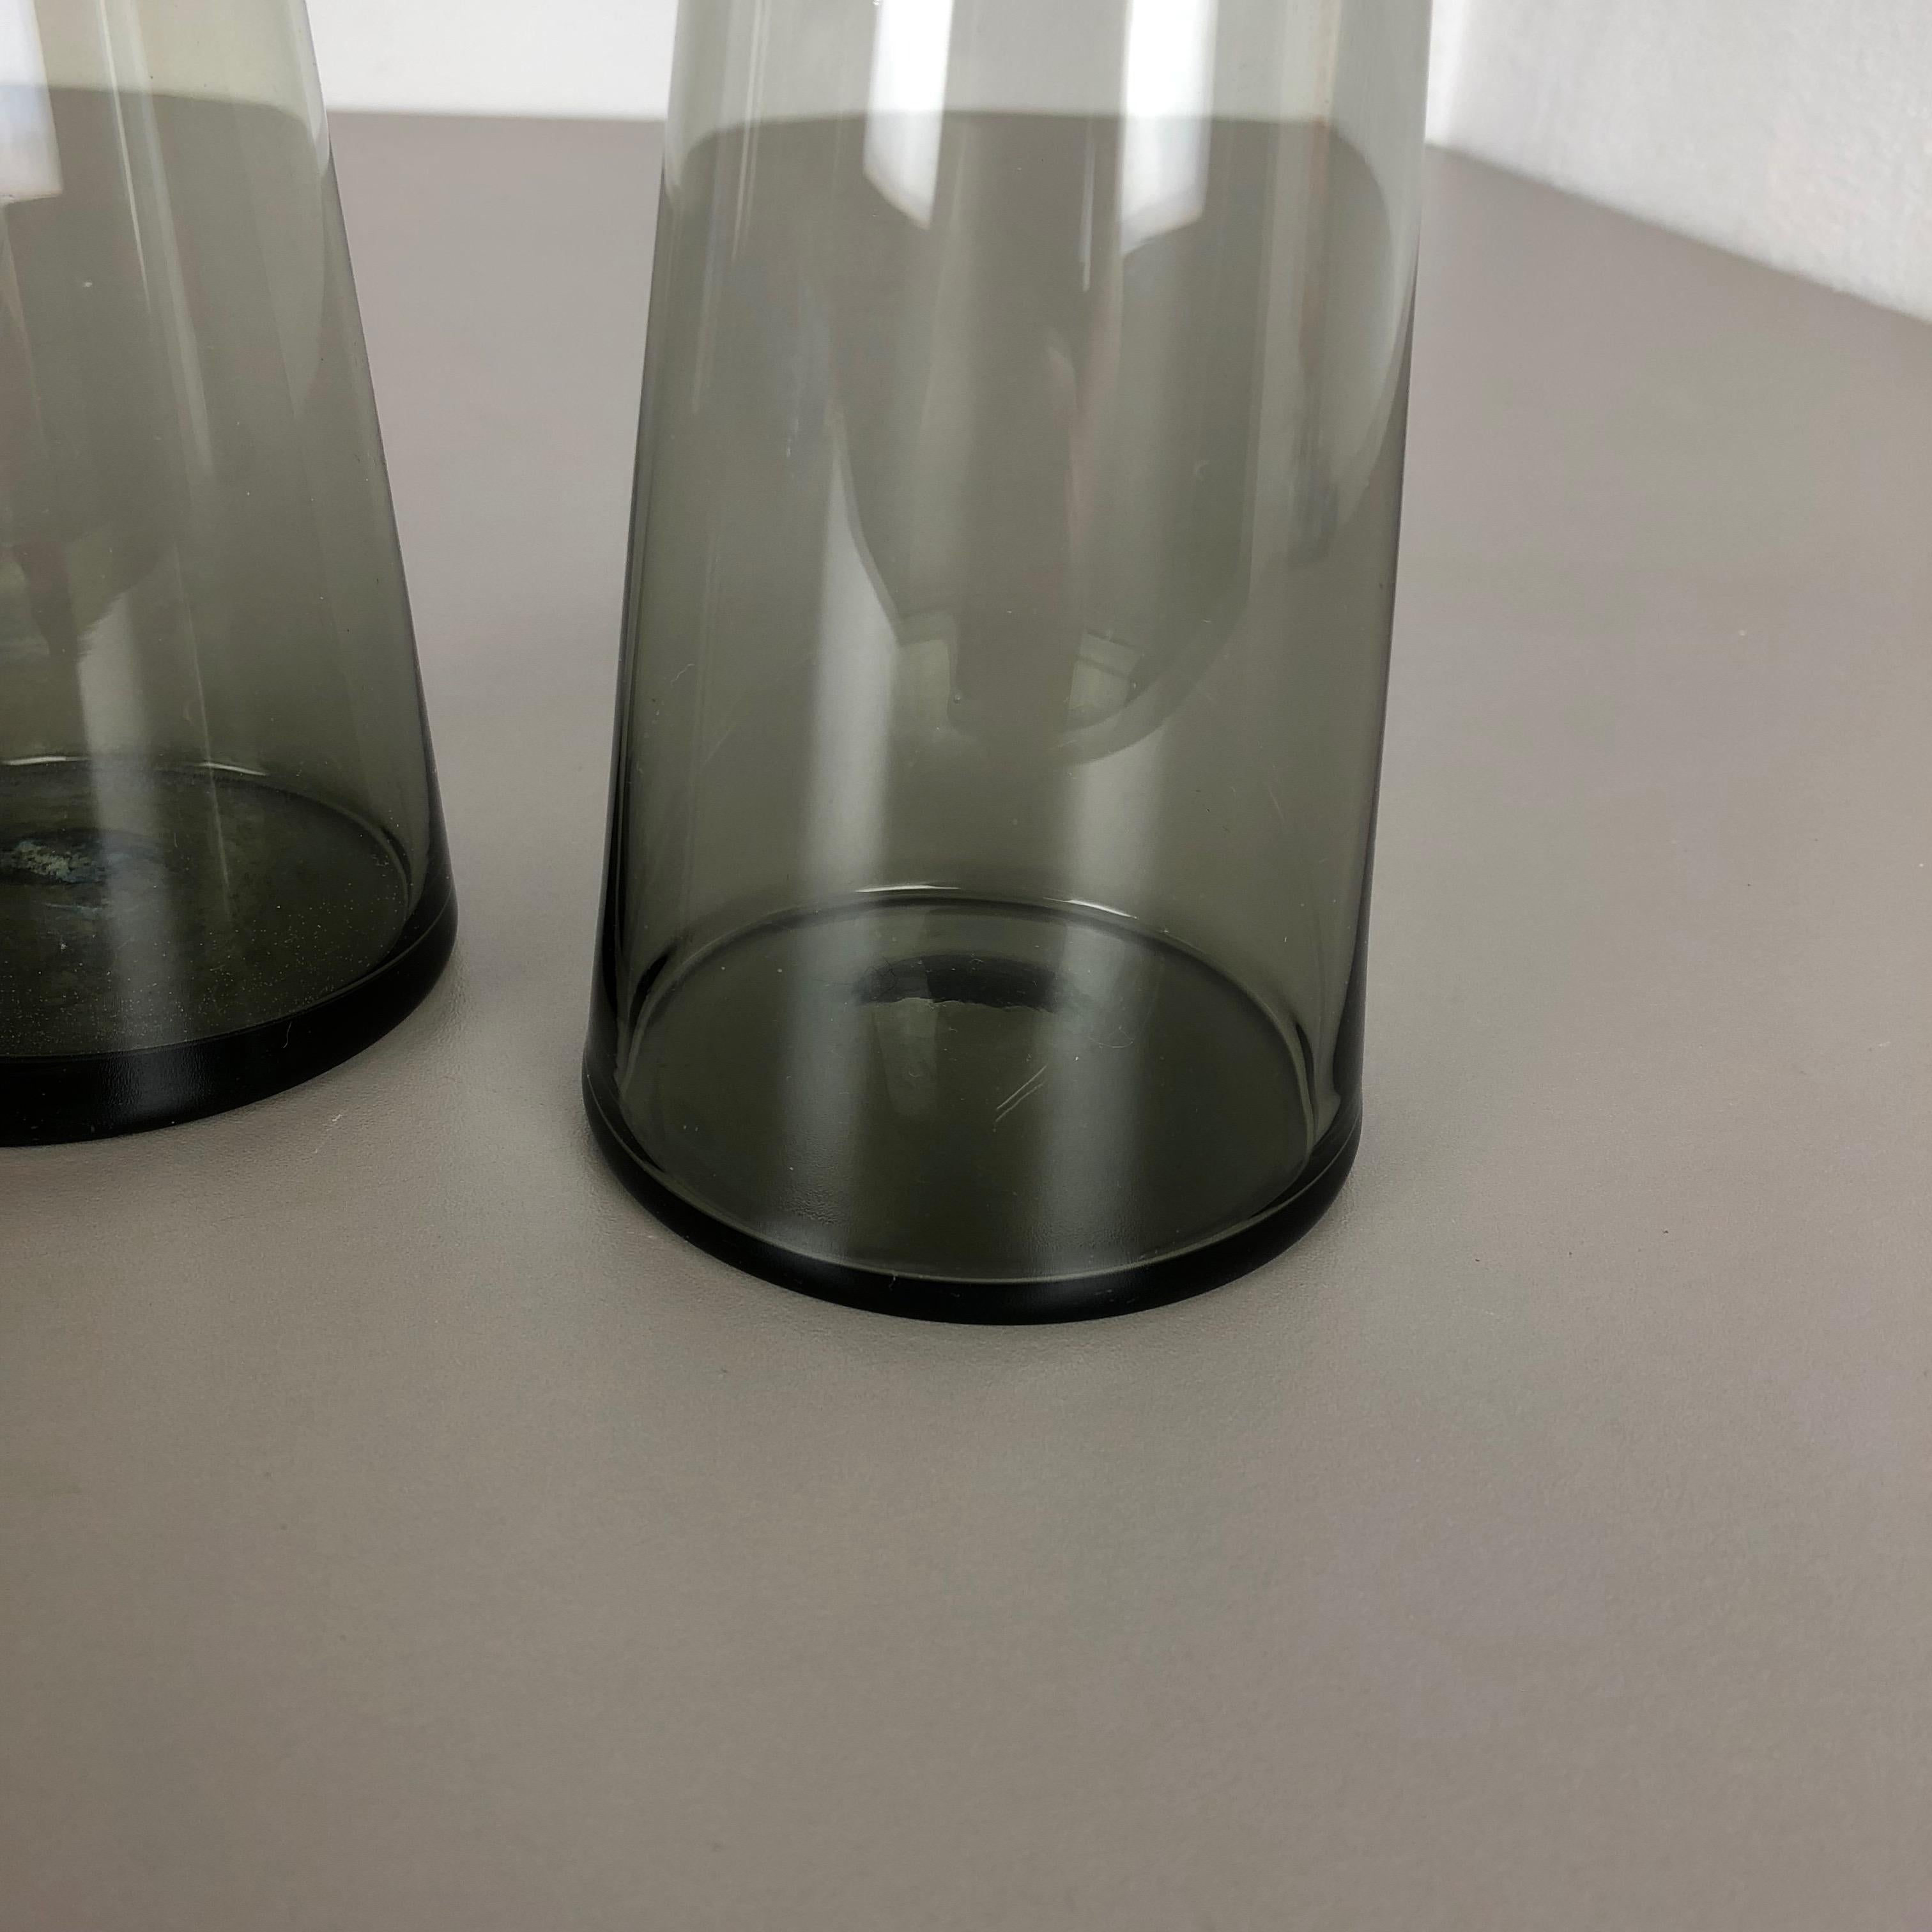 Vintage 1960s Set of 2 Turmalin Vases by Wilhelm Wagenfeld for WMF, Germany For Sale 6